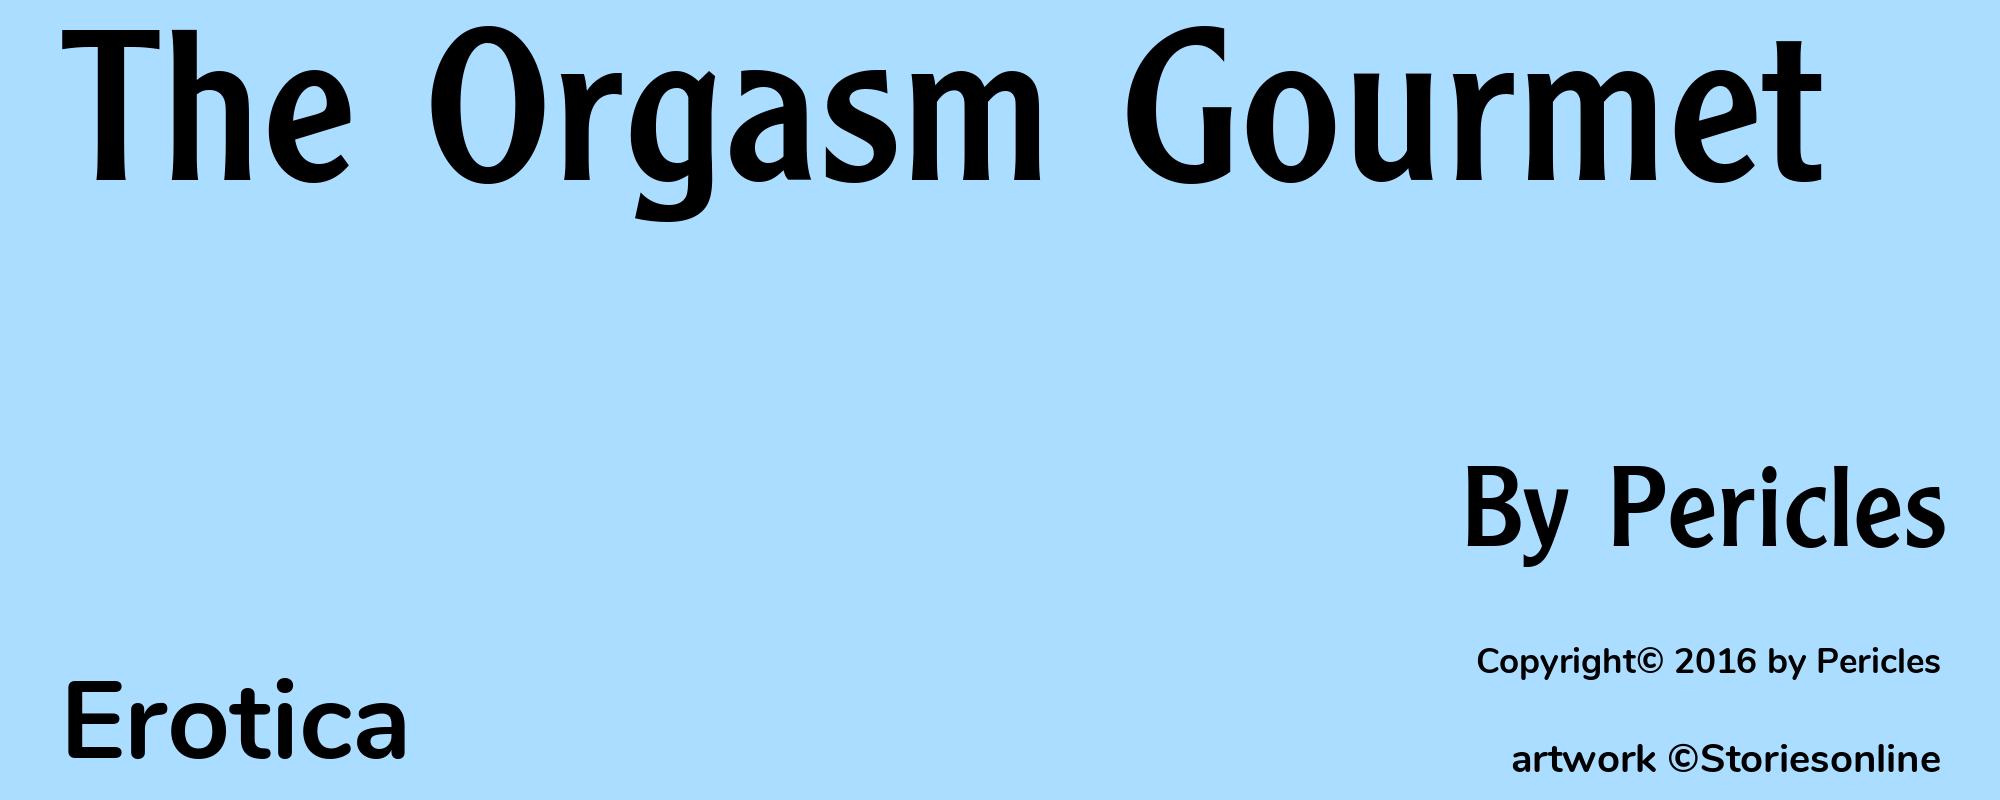 The Orgasm Gourmet - Cover